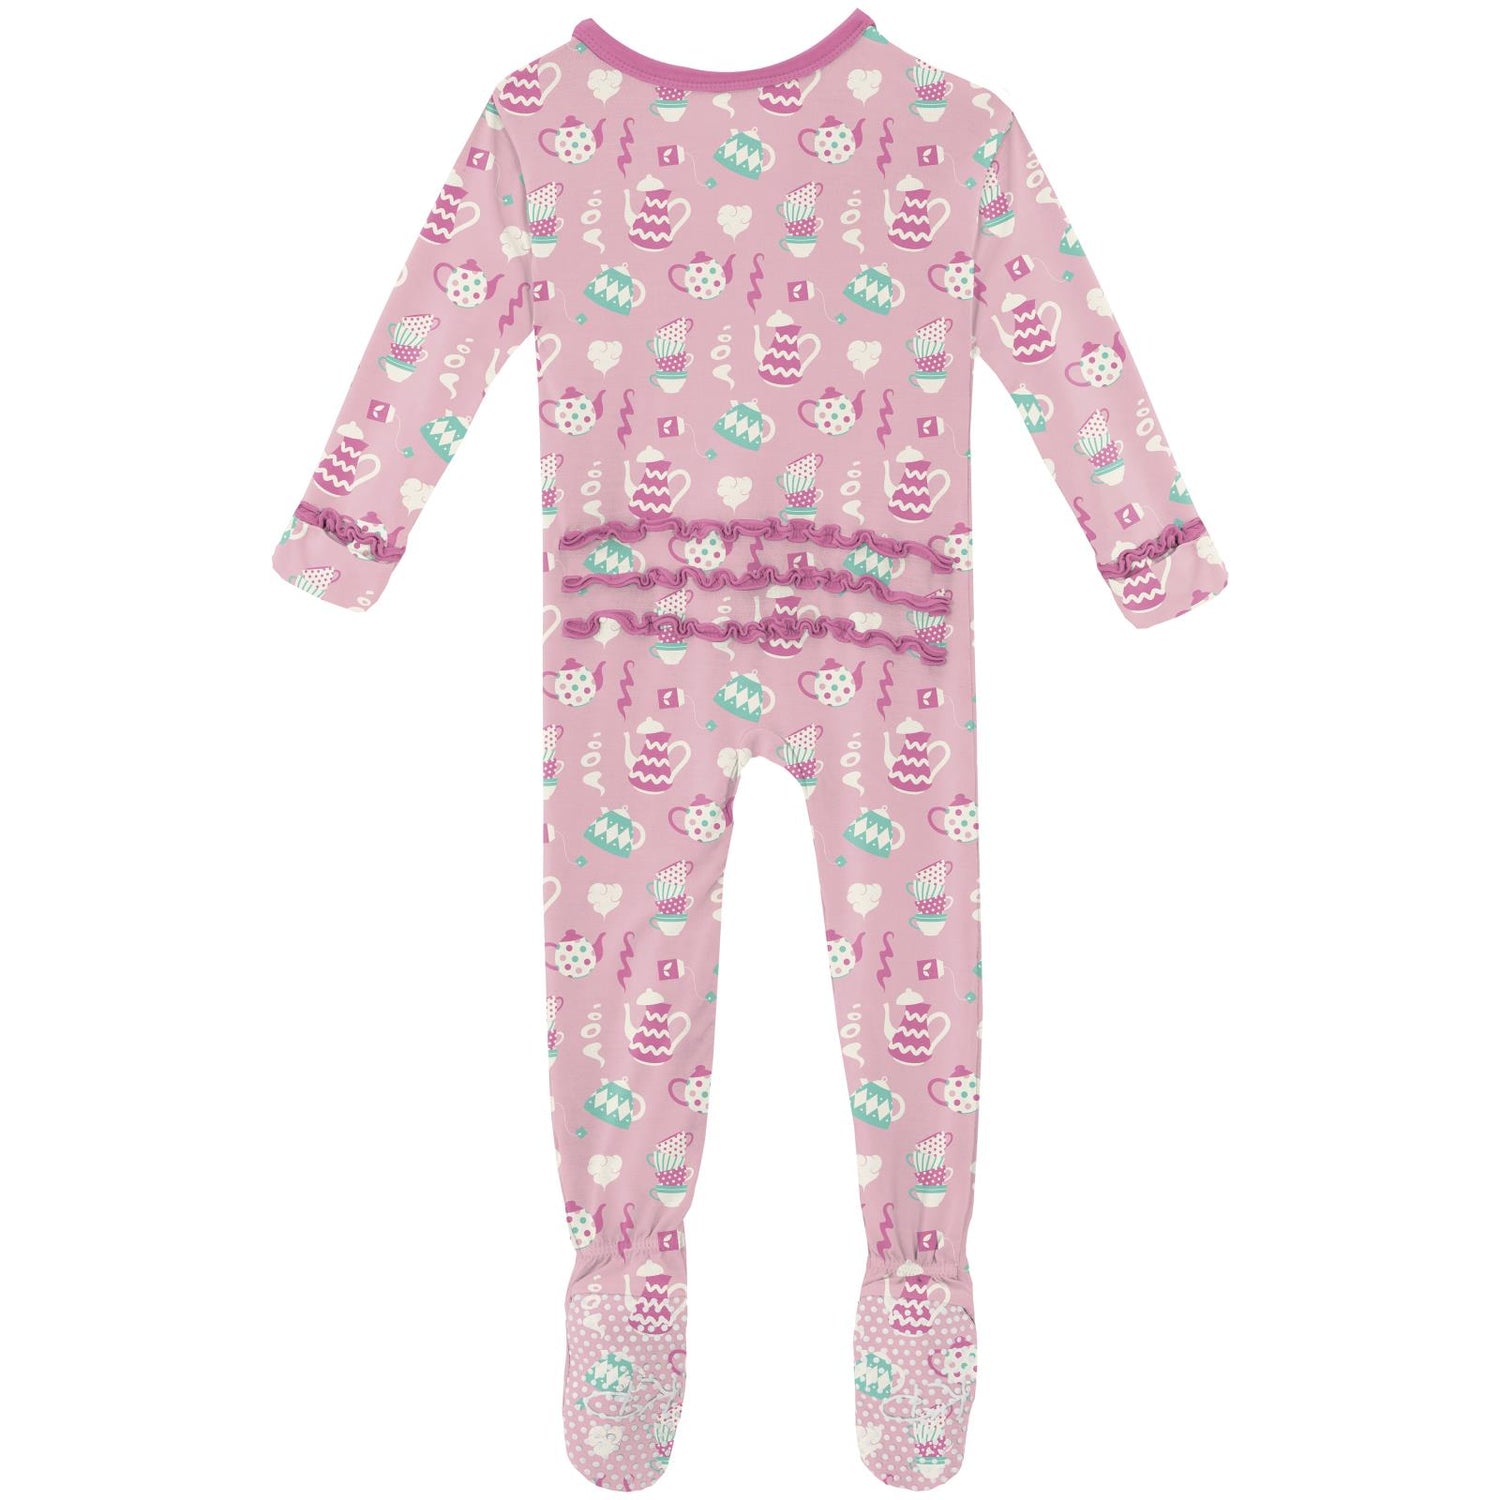 Print Muffin Ruffle Footie with 2 Way Zipper in Cake Pop Tea Party